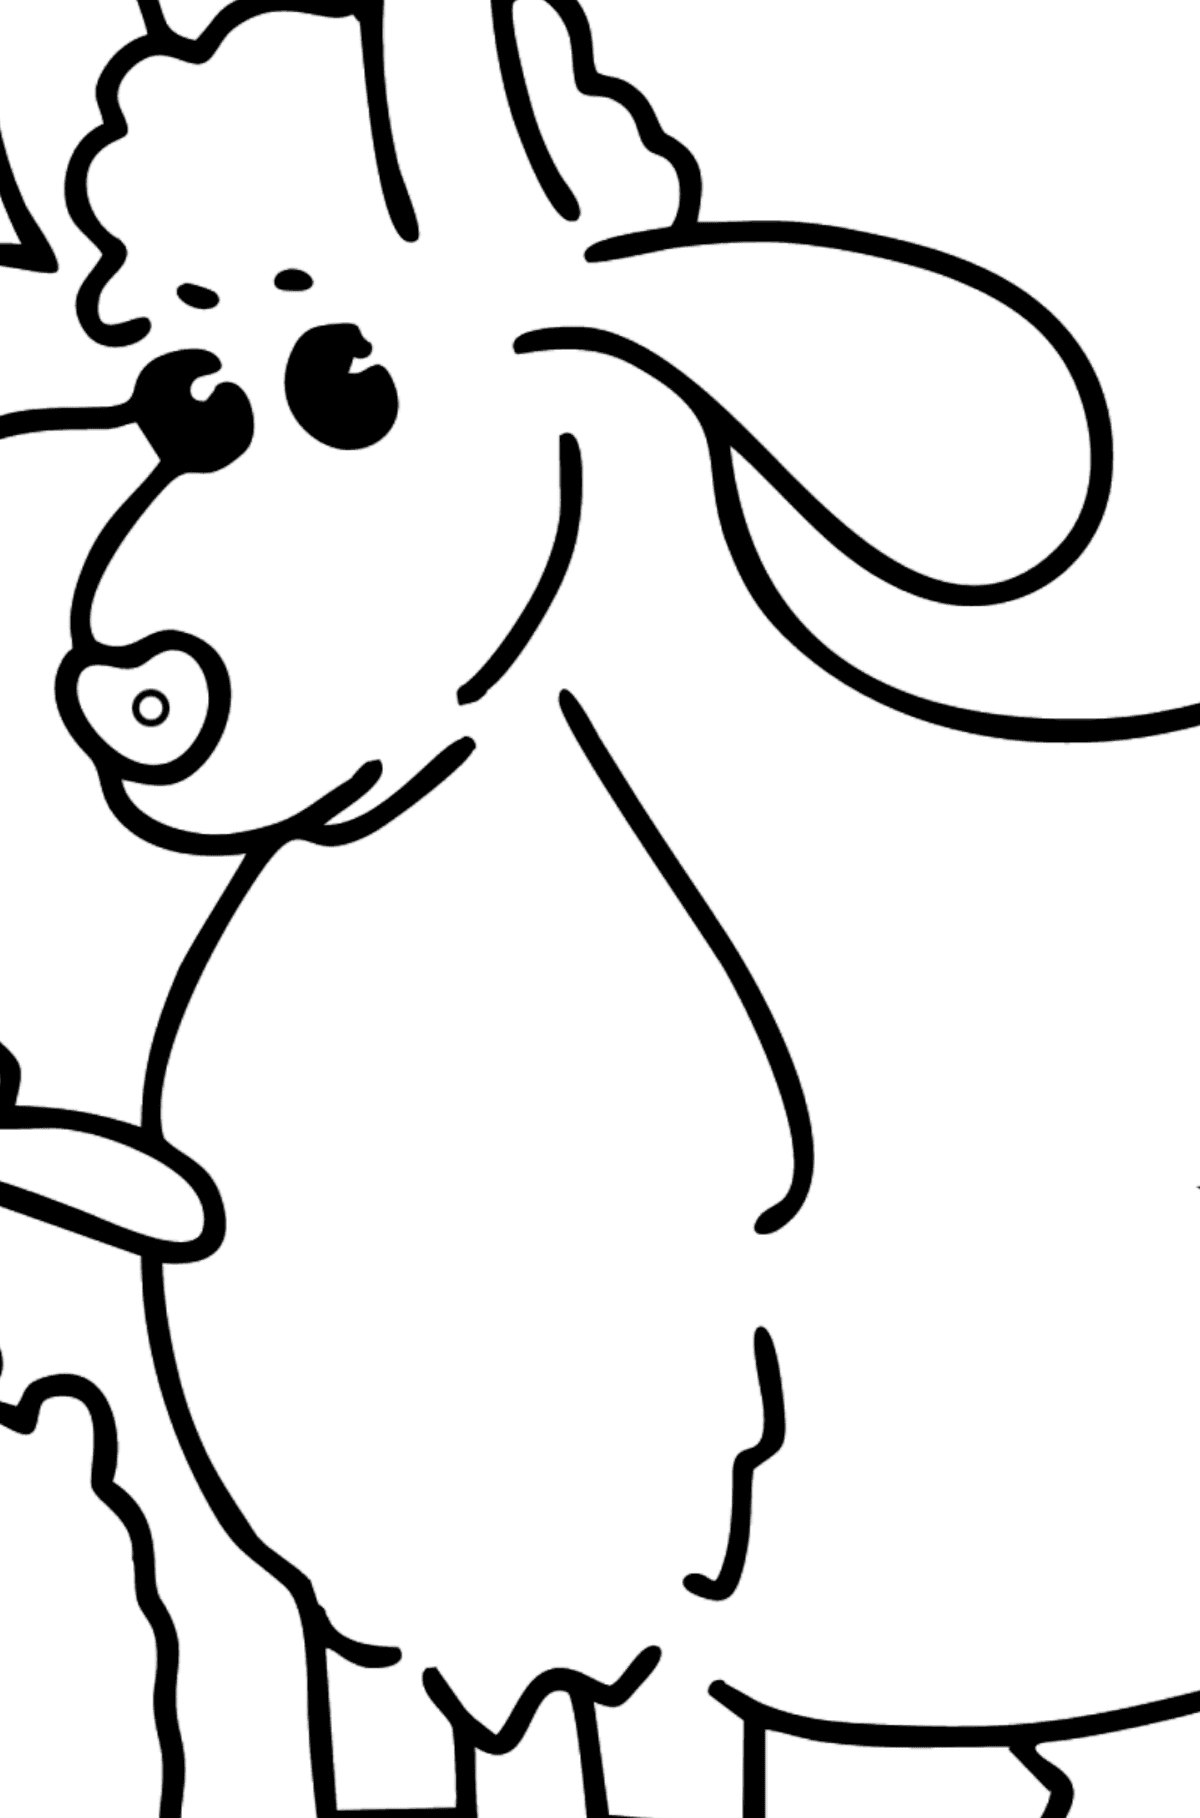 Goat and Kid coloring page - Coloring by Geometric Shapes for Kids